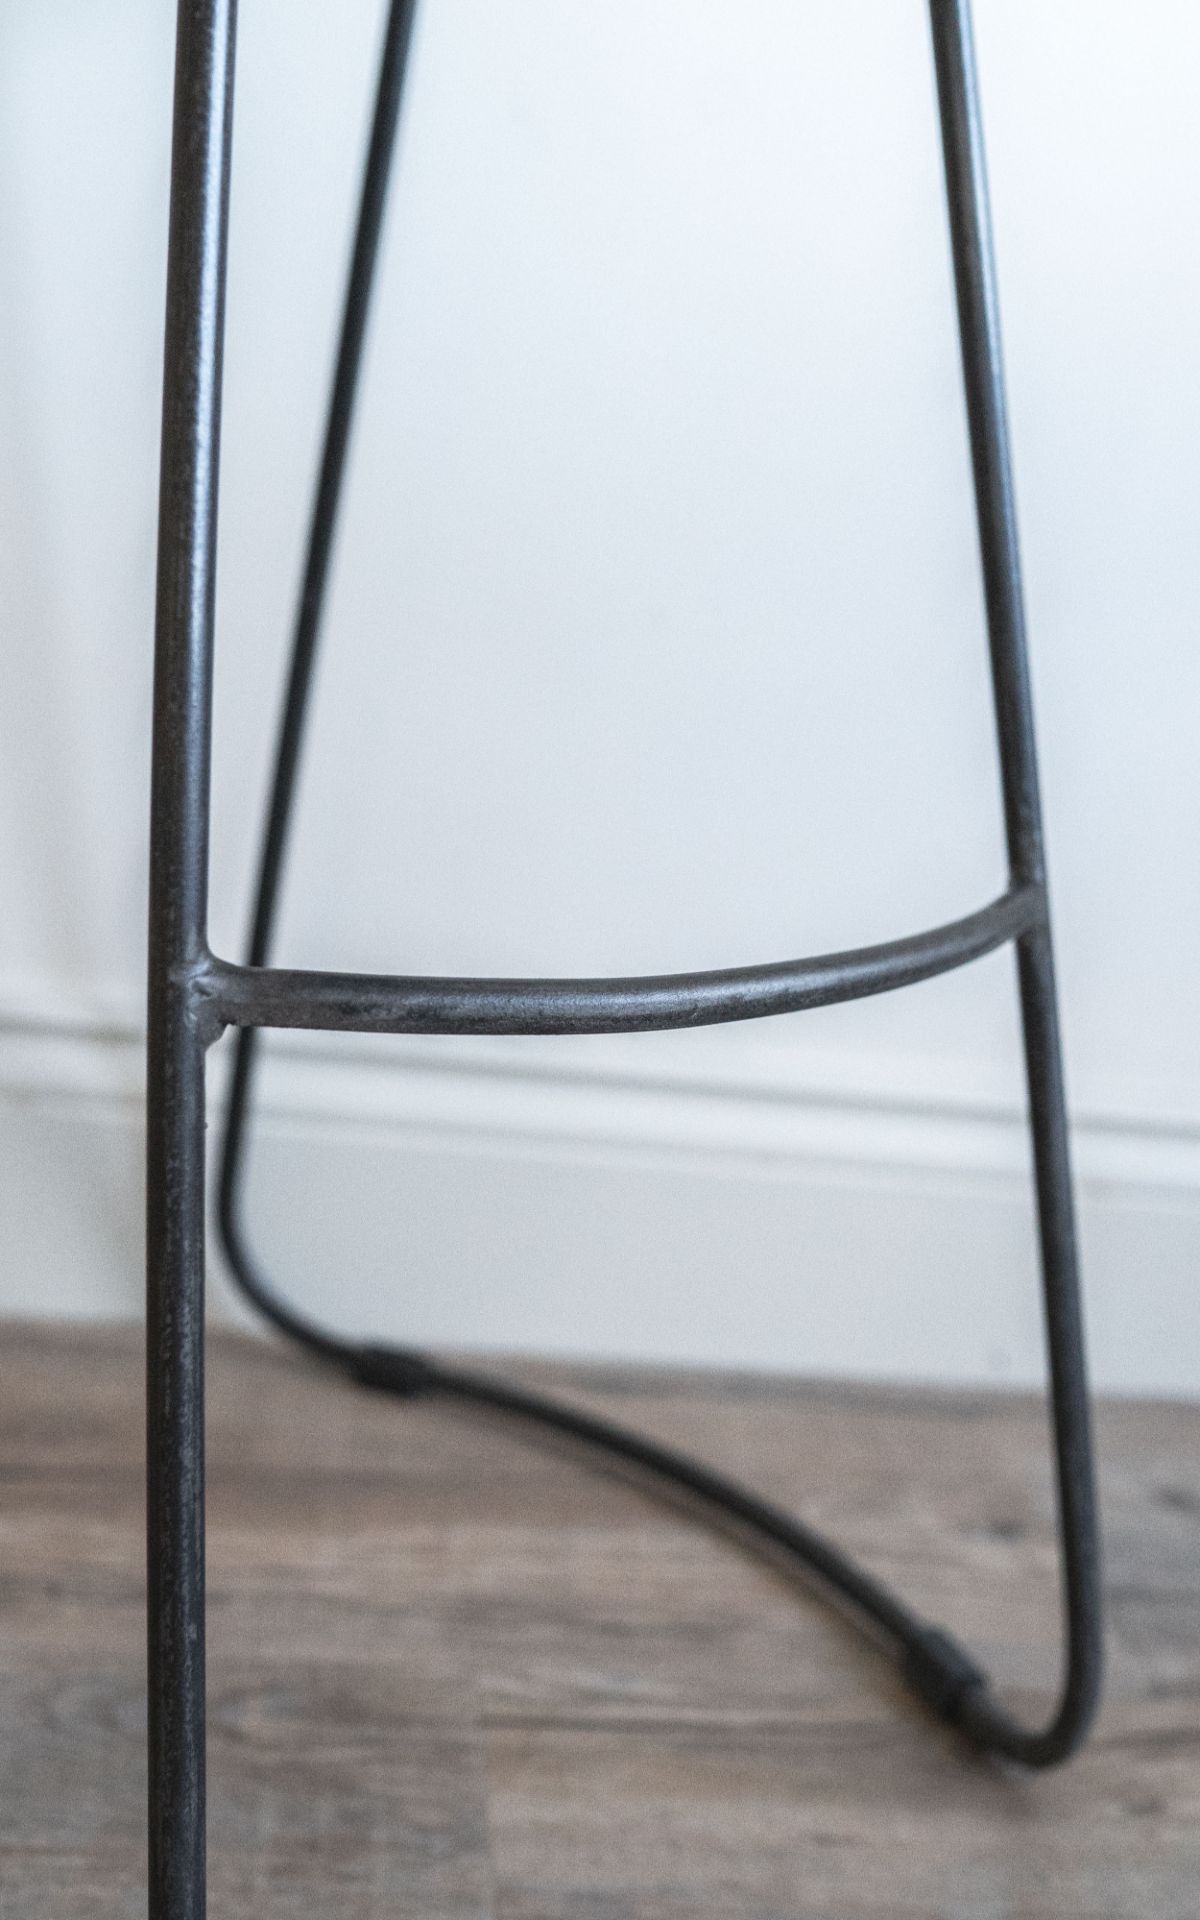 2 x Tall Dark Wood and Iron Stool: A gorgeous high bar stool with an ergonomic seat. - Image 3 of 3